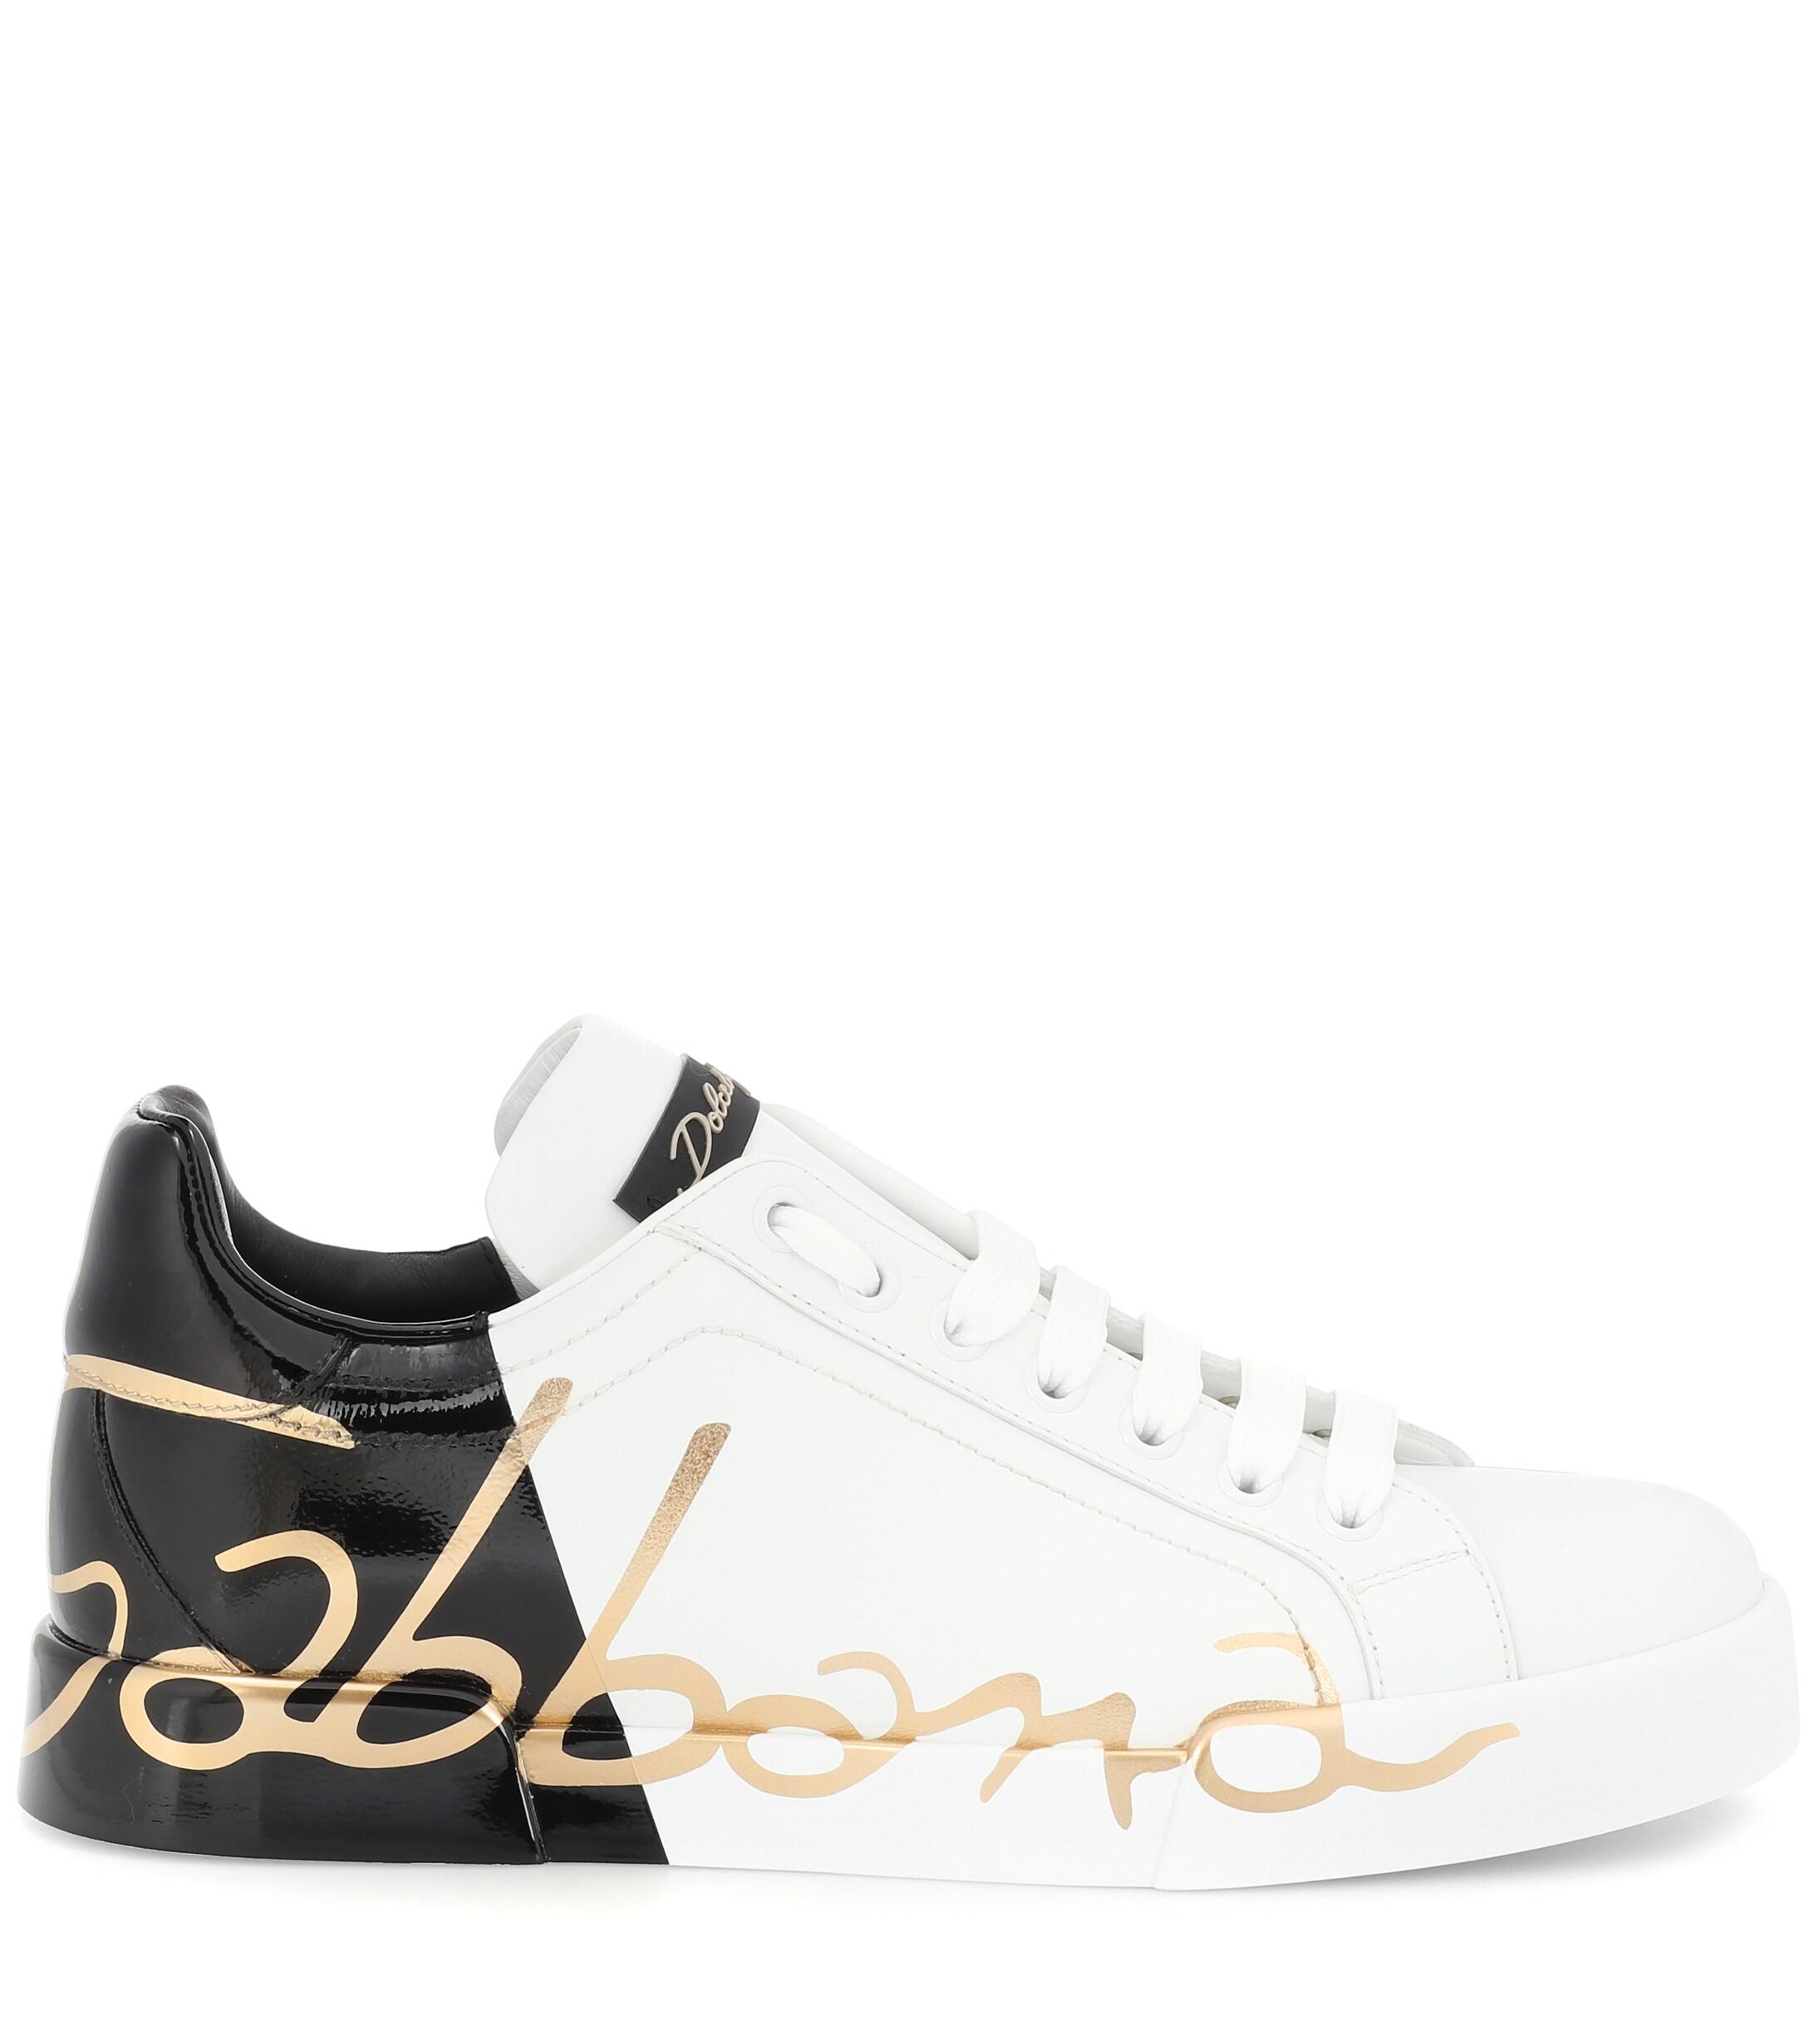 Dolce & Gabbana Leather Sneakers in Black (White) - Save 53% - Lyst